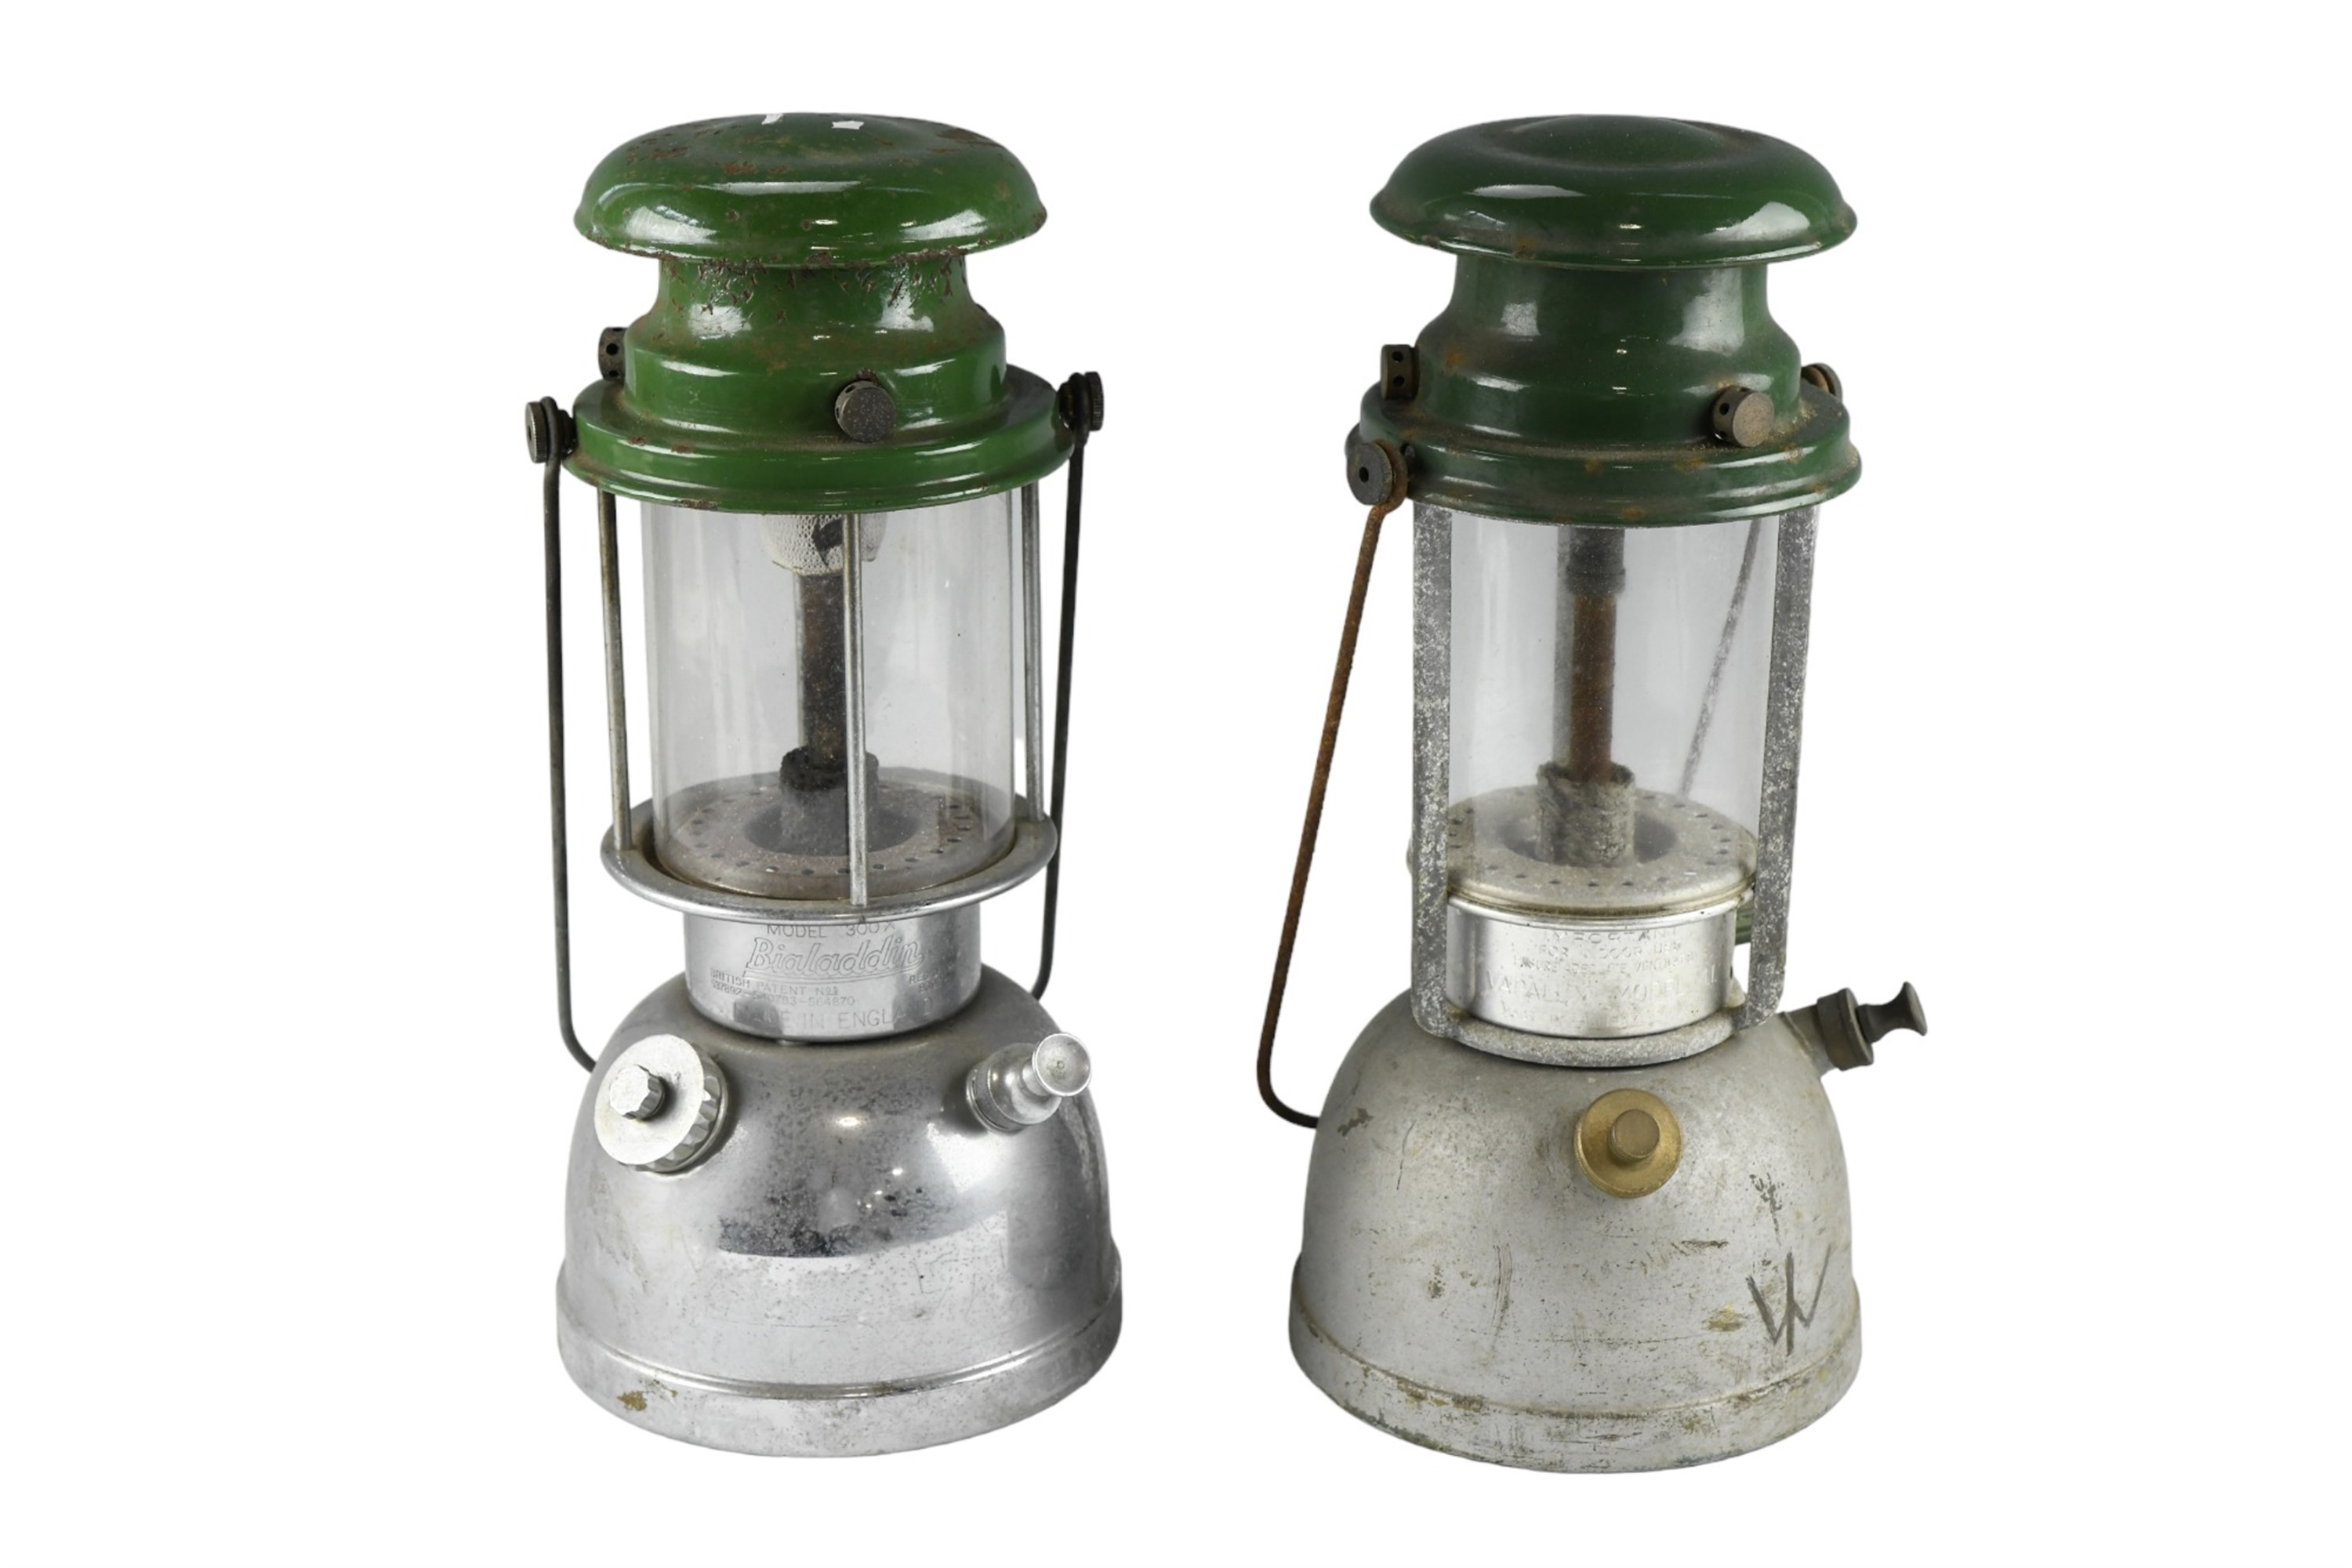 A Bialaddin Model 300X Paraffin pressure lamp together with a Varalux Model M1